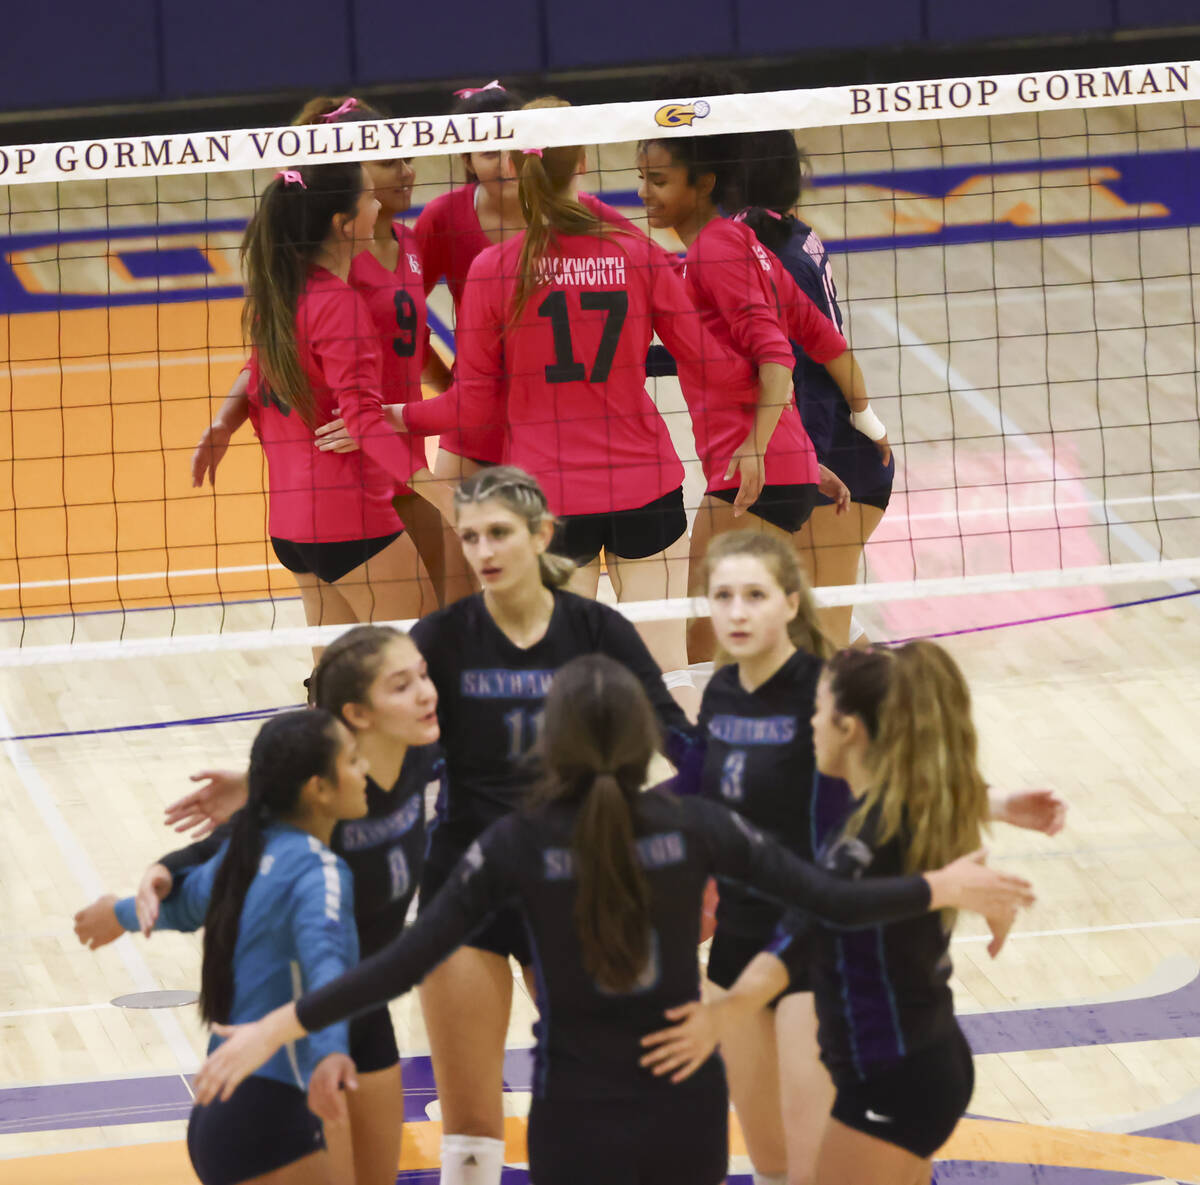 Bishop Gorman and Silverado players huddle after a play during a volleyball game at Bishop Gorm ...